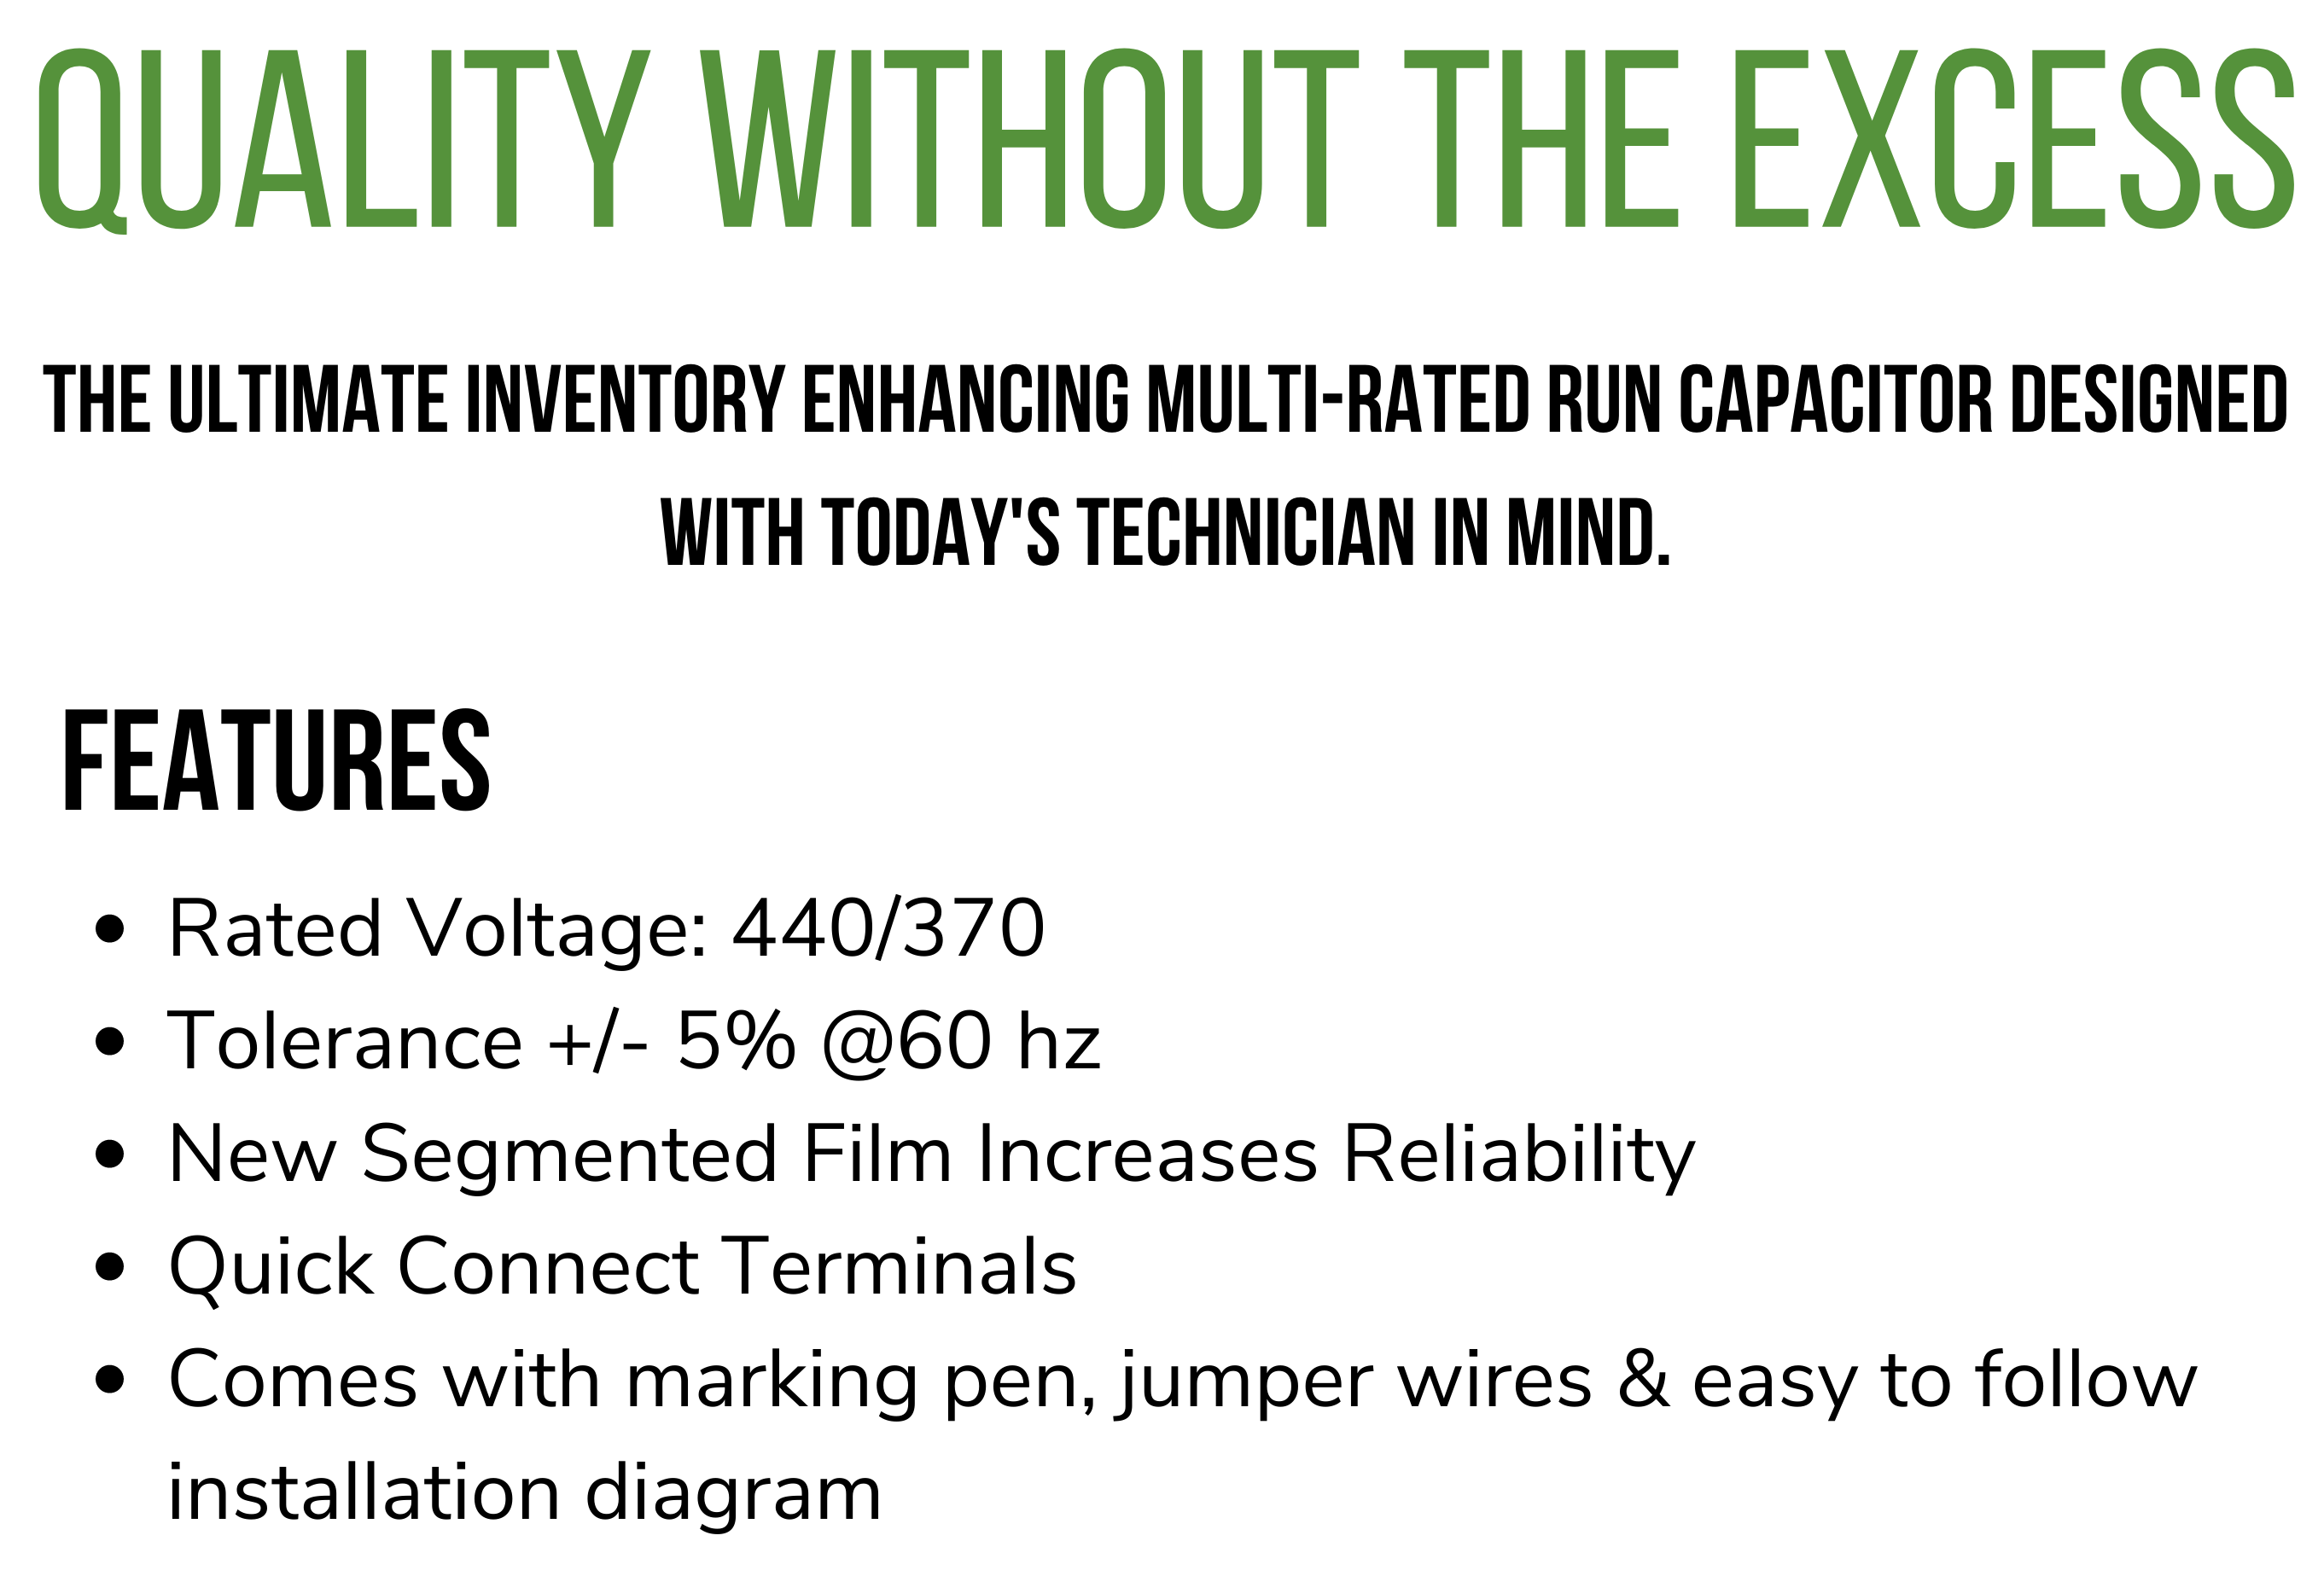 Quality without the excess The ultimate inventory enhancing multi-rated run capacitor designed with today's technician in mind.